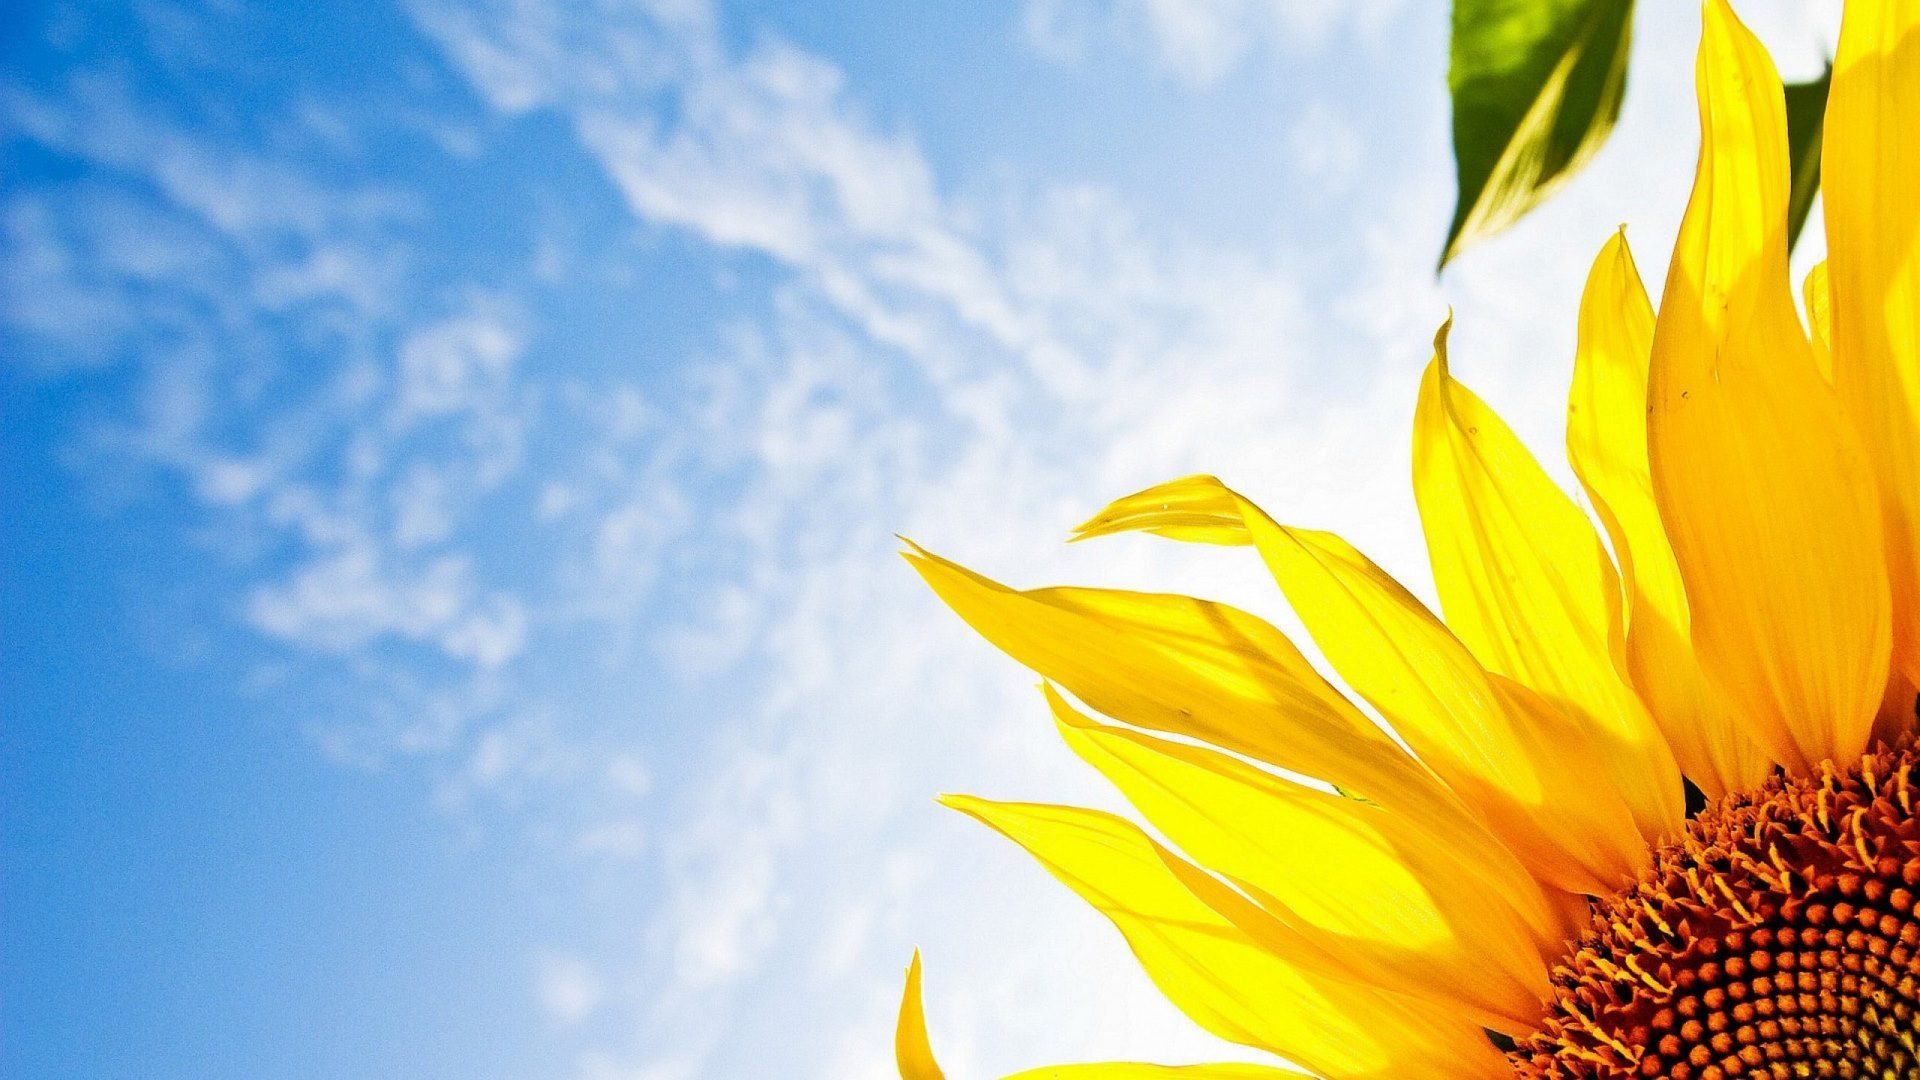 A sunflower against a blue sky with white clouds - Sunshine